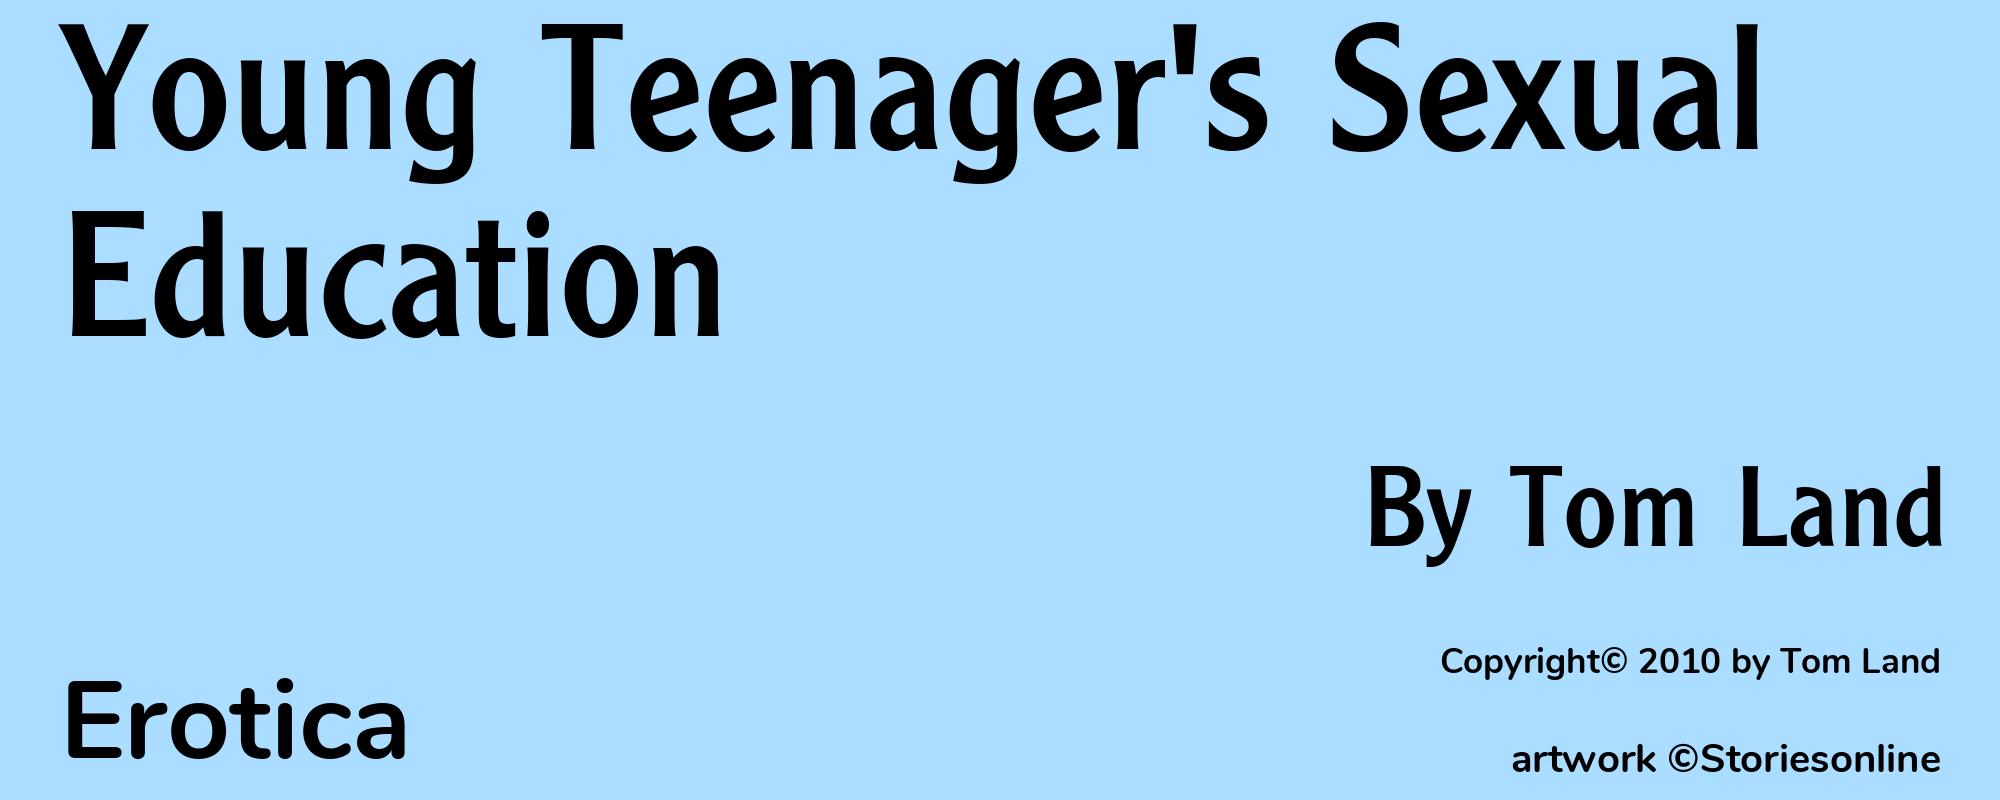 Young Teenager's Sexual Education - Cover